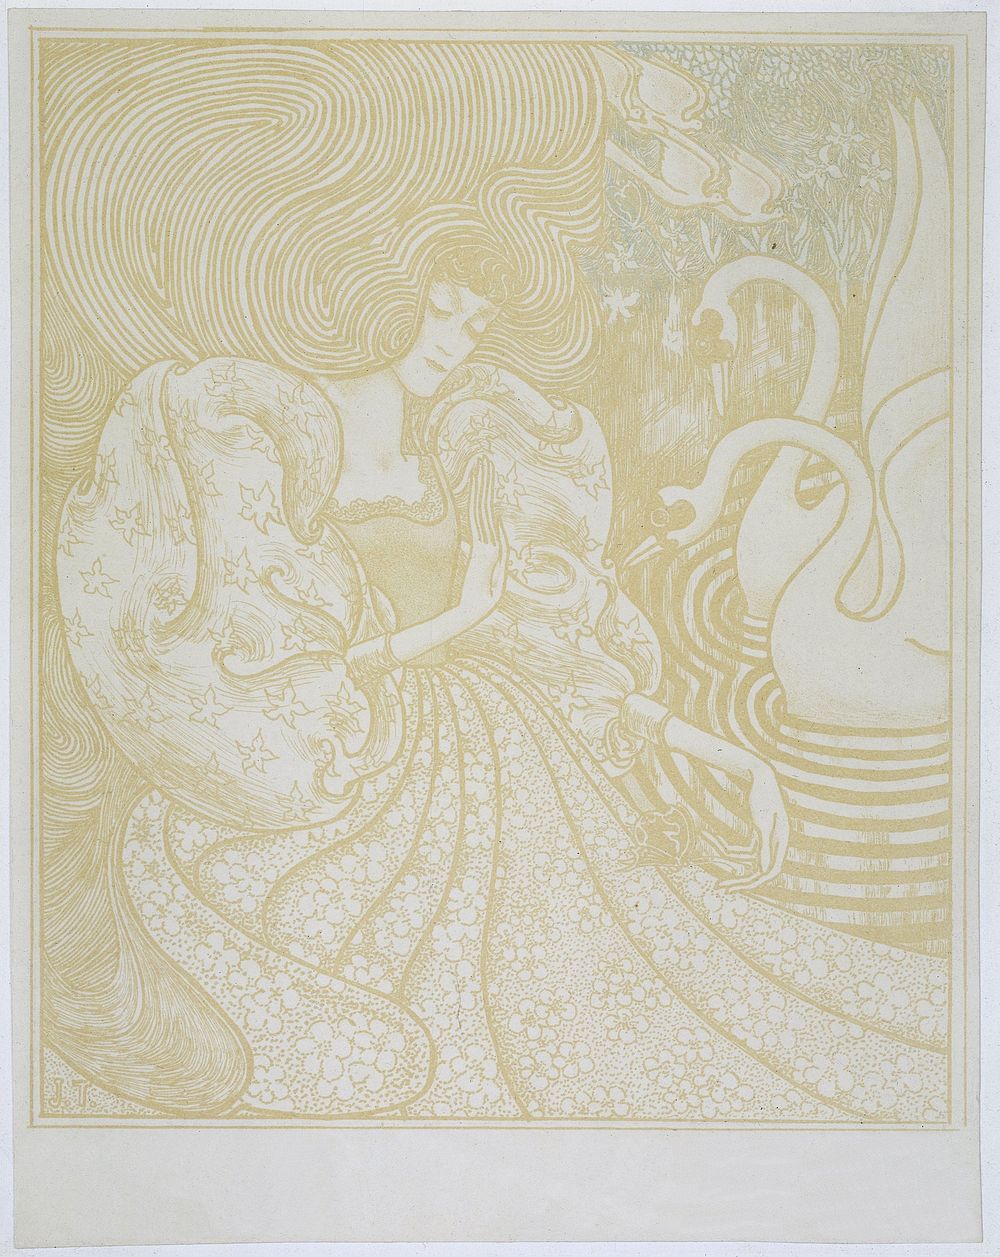 Woman with a Butterfly at a Pond with Two Swans (1894) by Jan Toorop. Original public domain image from the Rijksmuseum